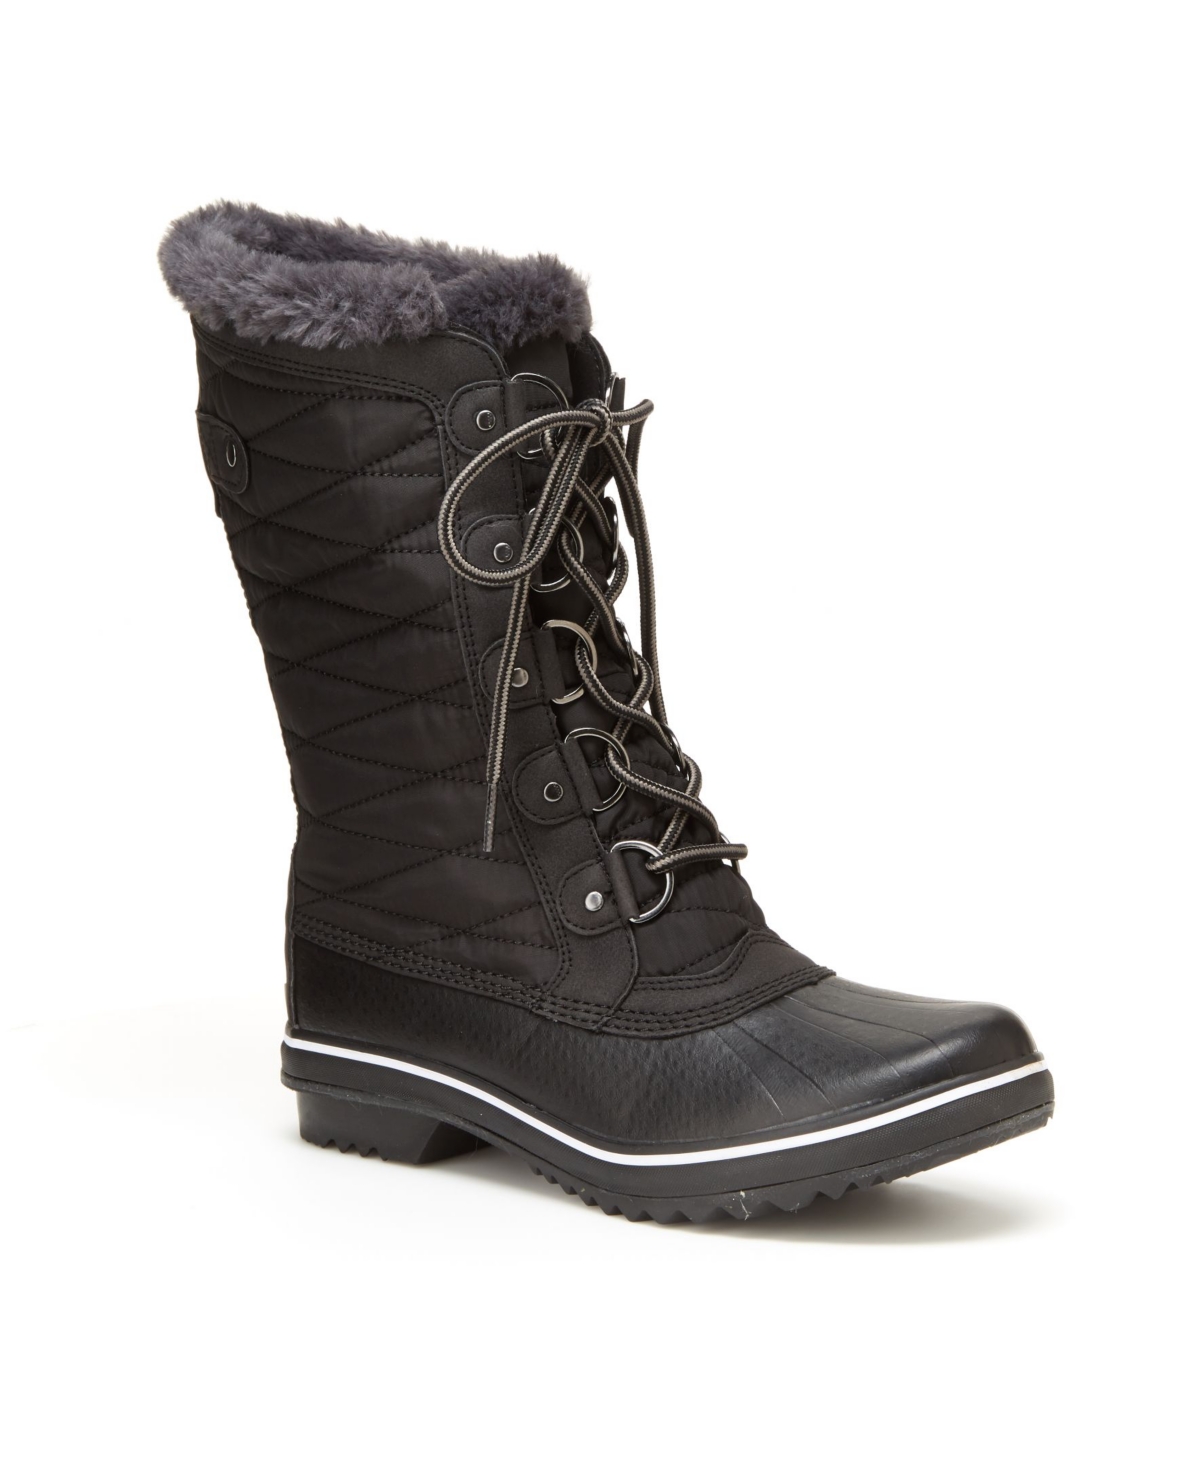 Jbu Chilly Women's Mid Calf Boots Women's Shoes